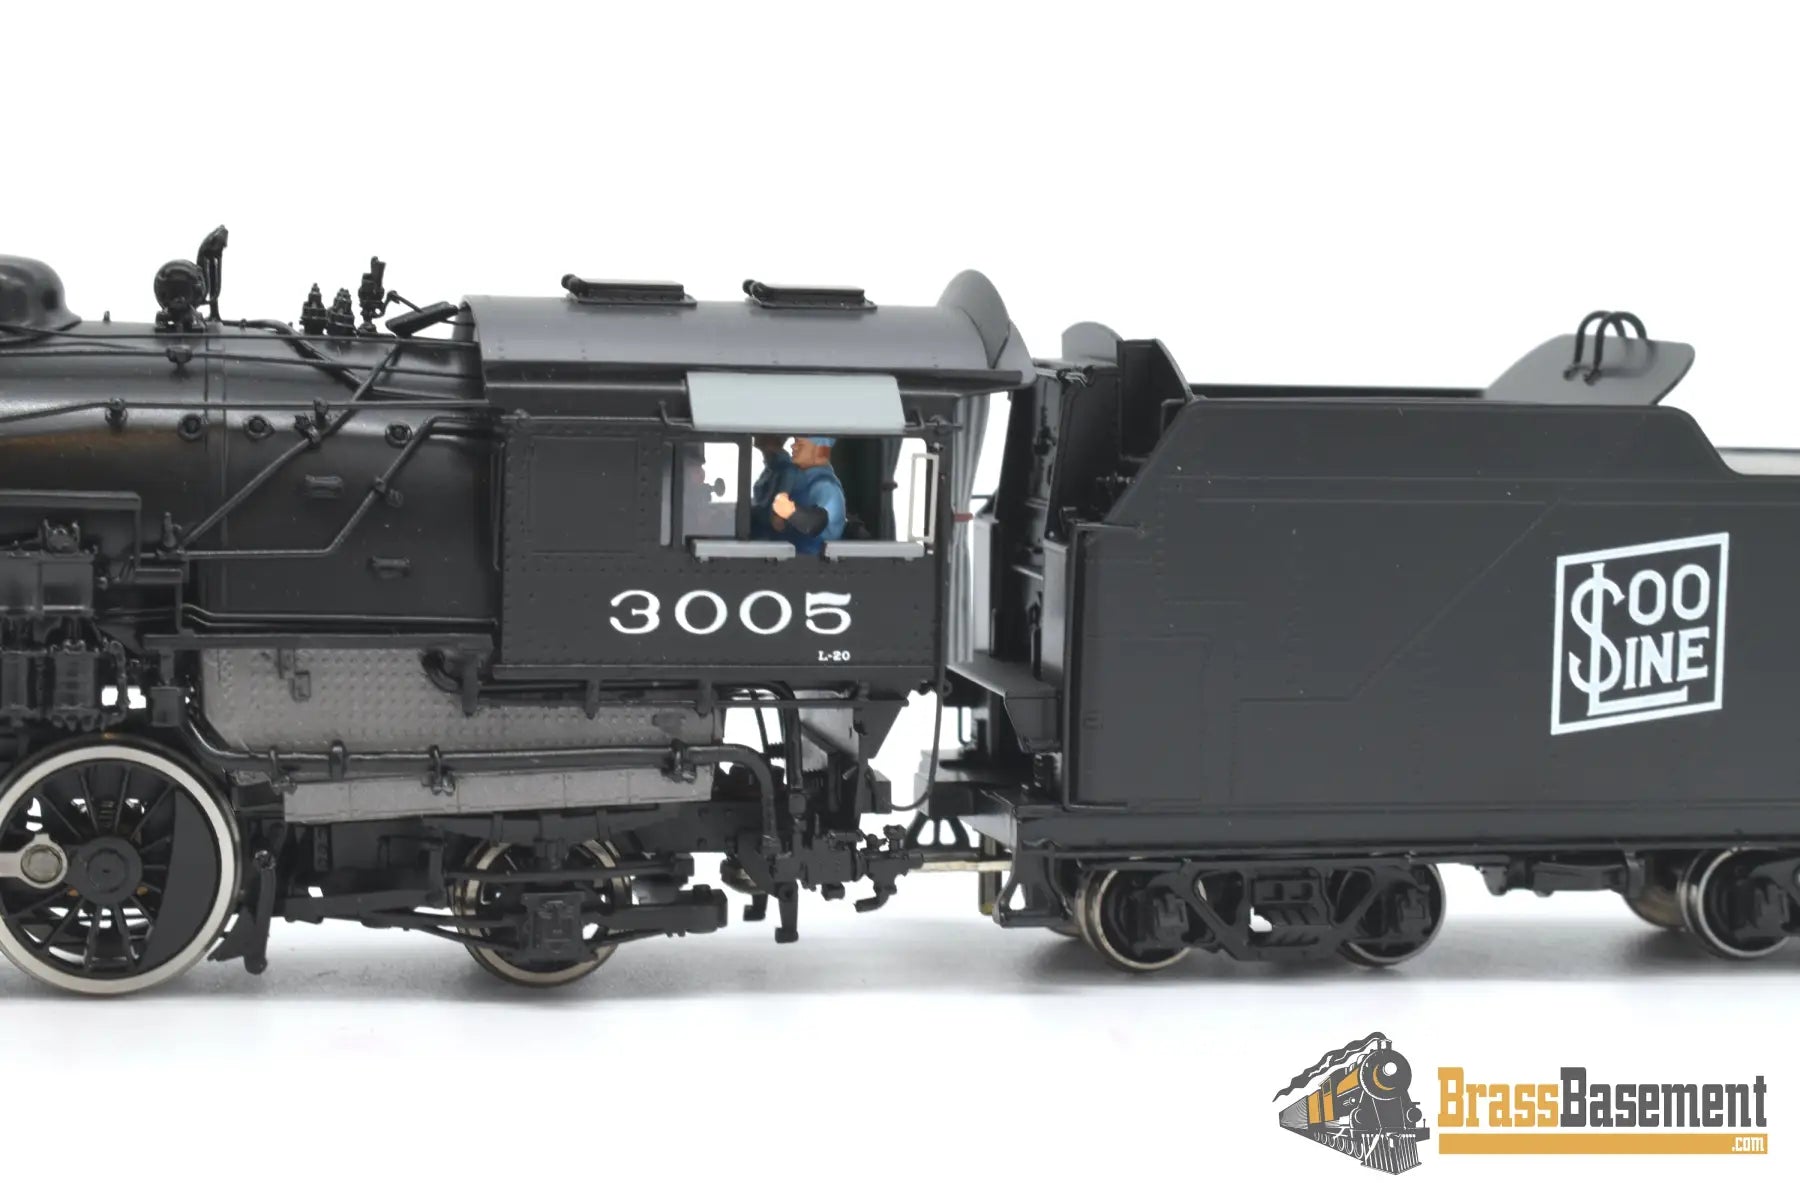 Ho Brass - Division Point Soo Line L - 20 #3005 2 - 8 - 2 Mikado Factory Paint Steam